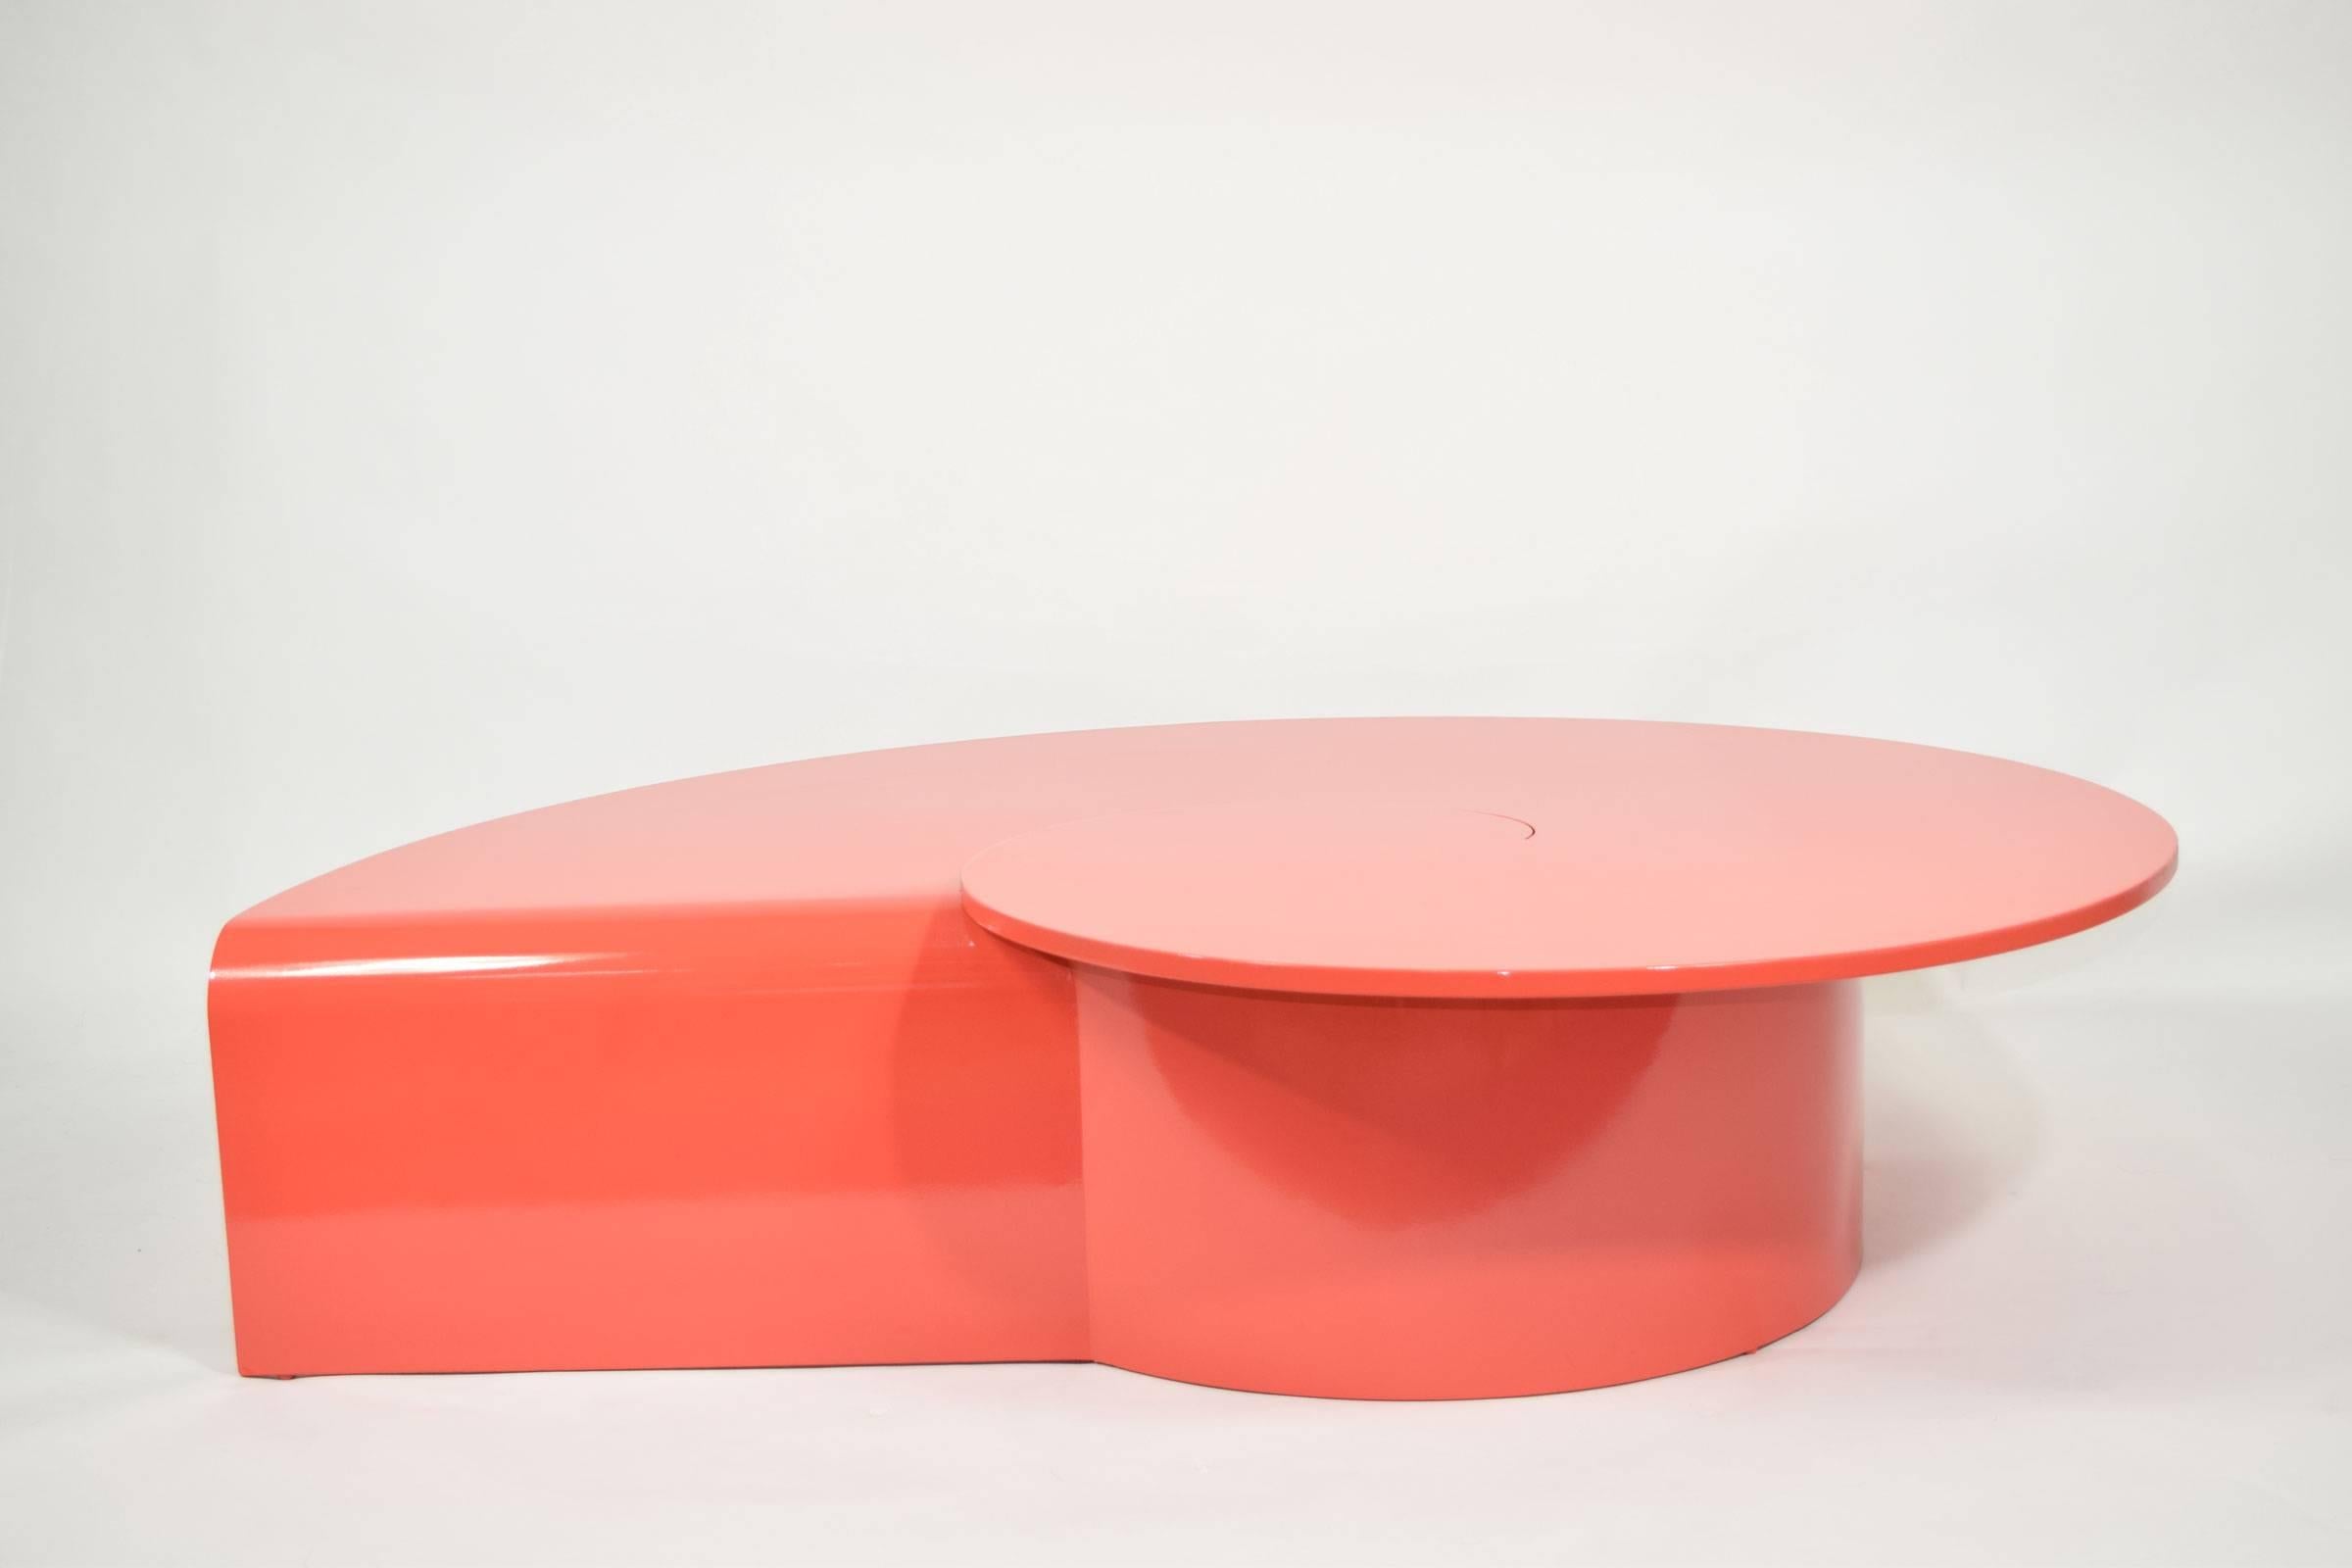 20th Century Fabulous Statement Coffee Table in Red/Orange Lacquer